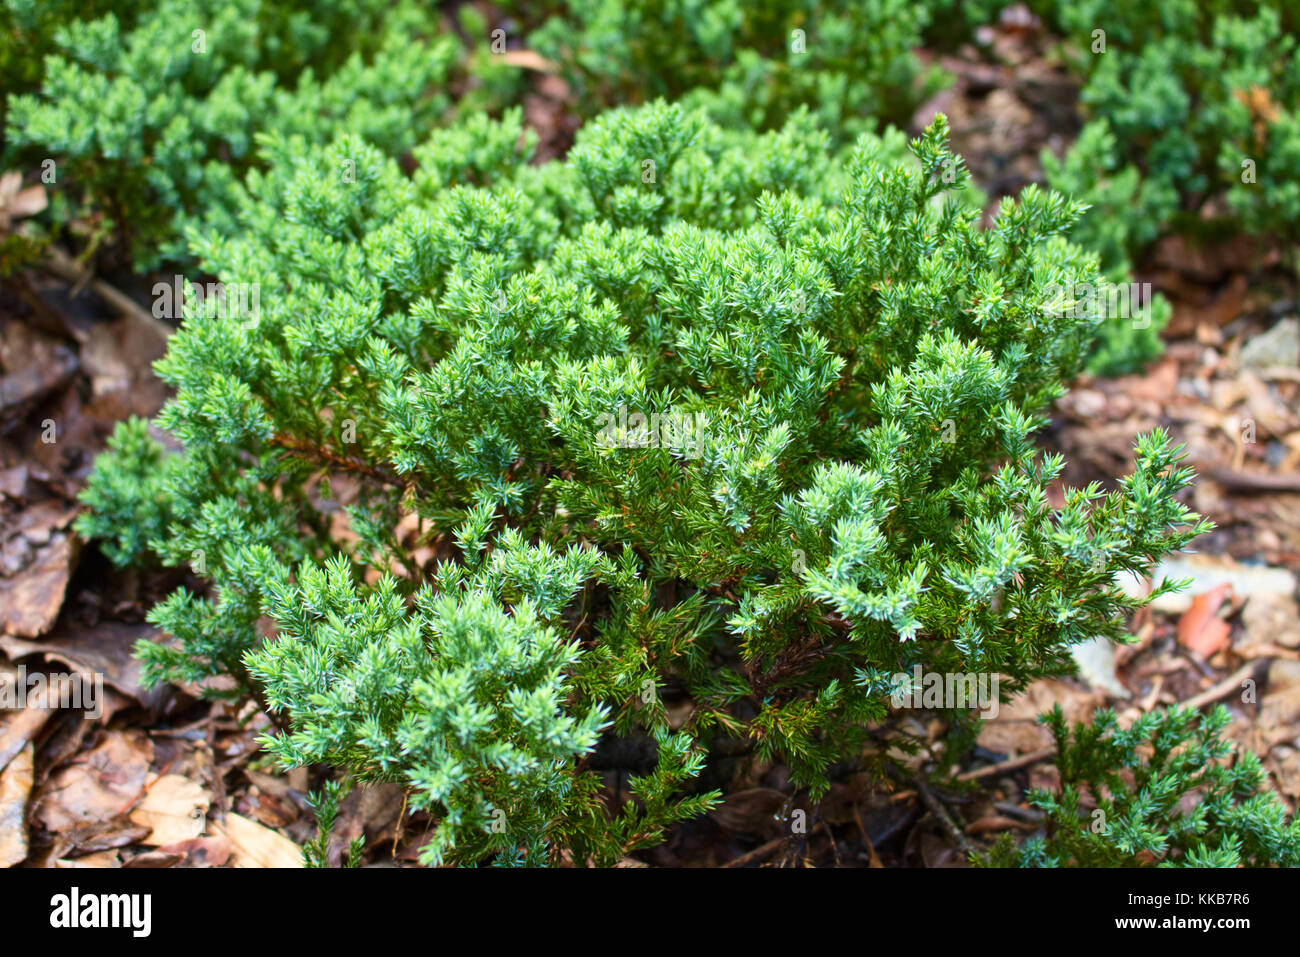 A close-up image of dwarf connifer. Stock Photo